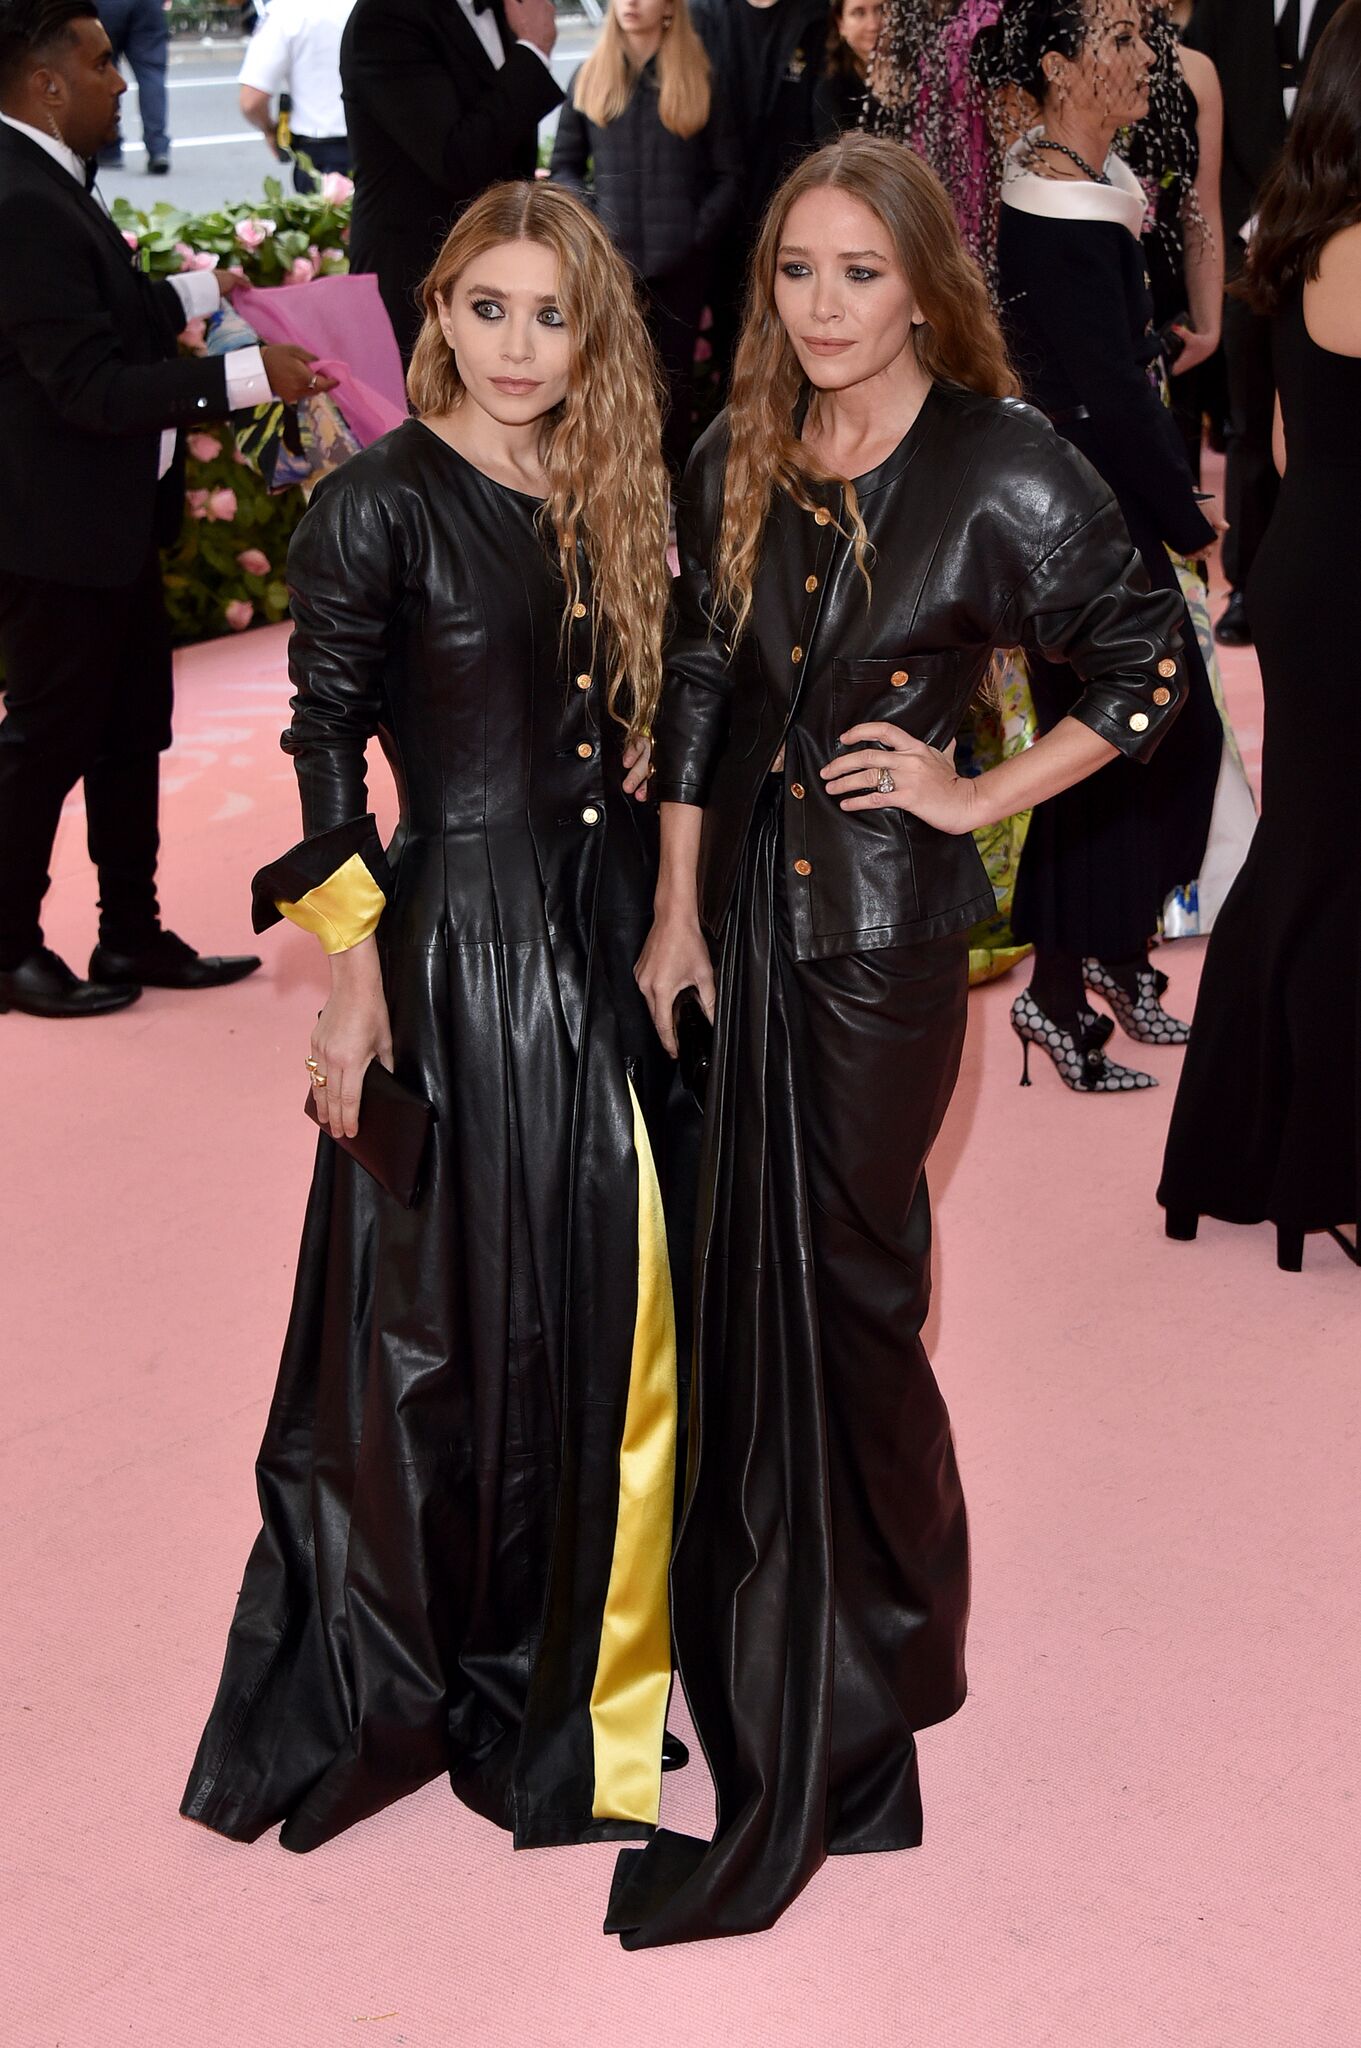 Mary-Kate Olsen and Ashley Olsen attend The 2019 Met Gala Celebrating Camp: Notes On Fashion at The Metropolitan Museum of Art | Getty Images